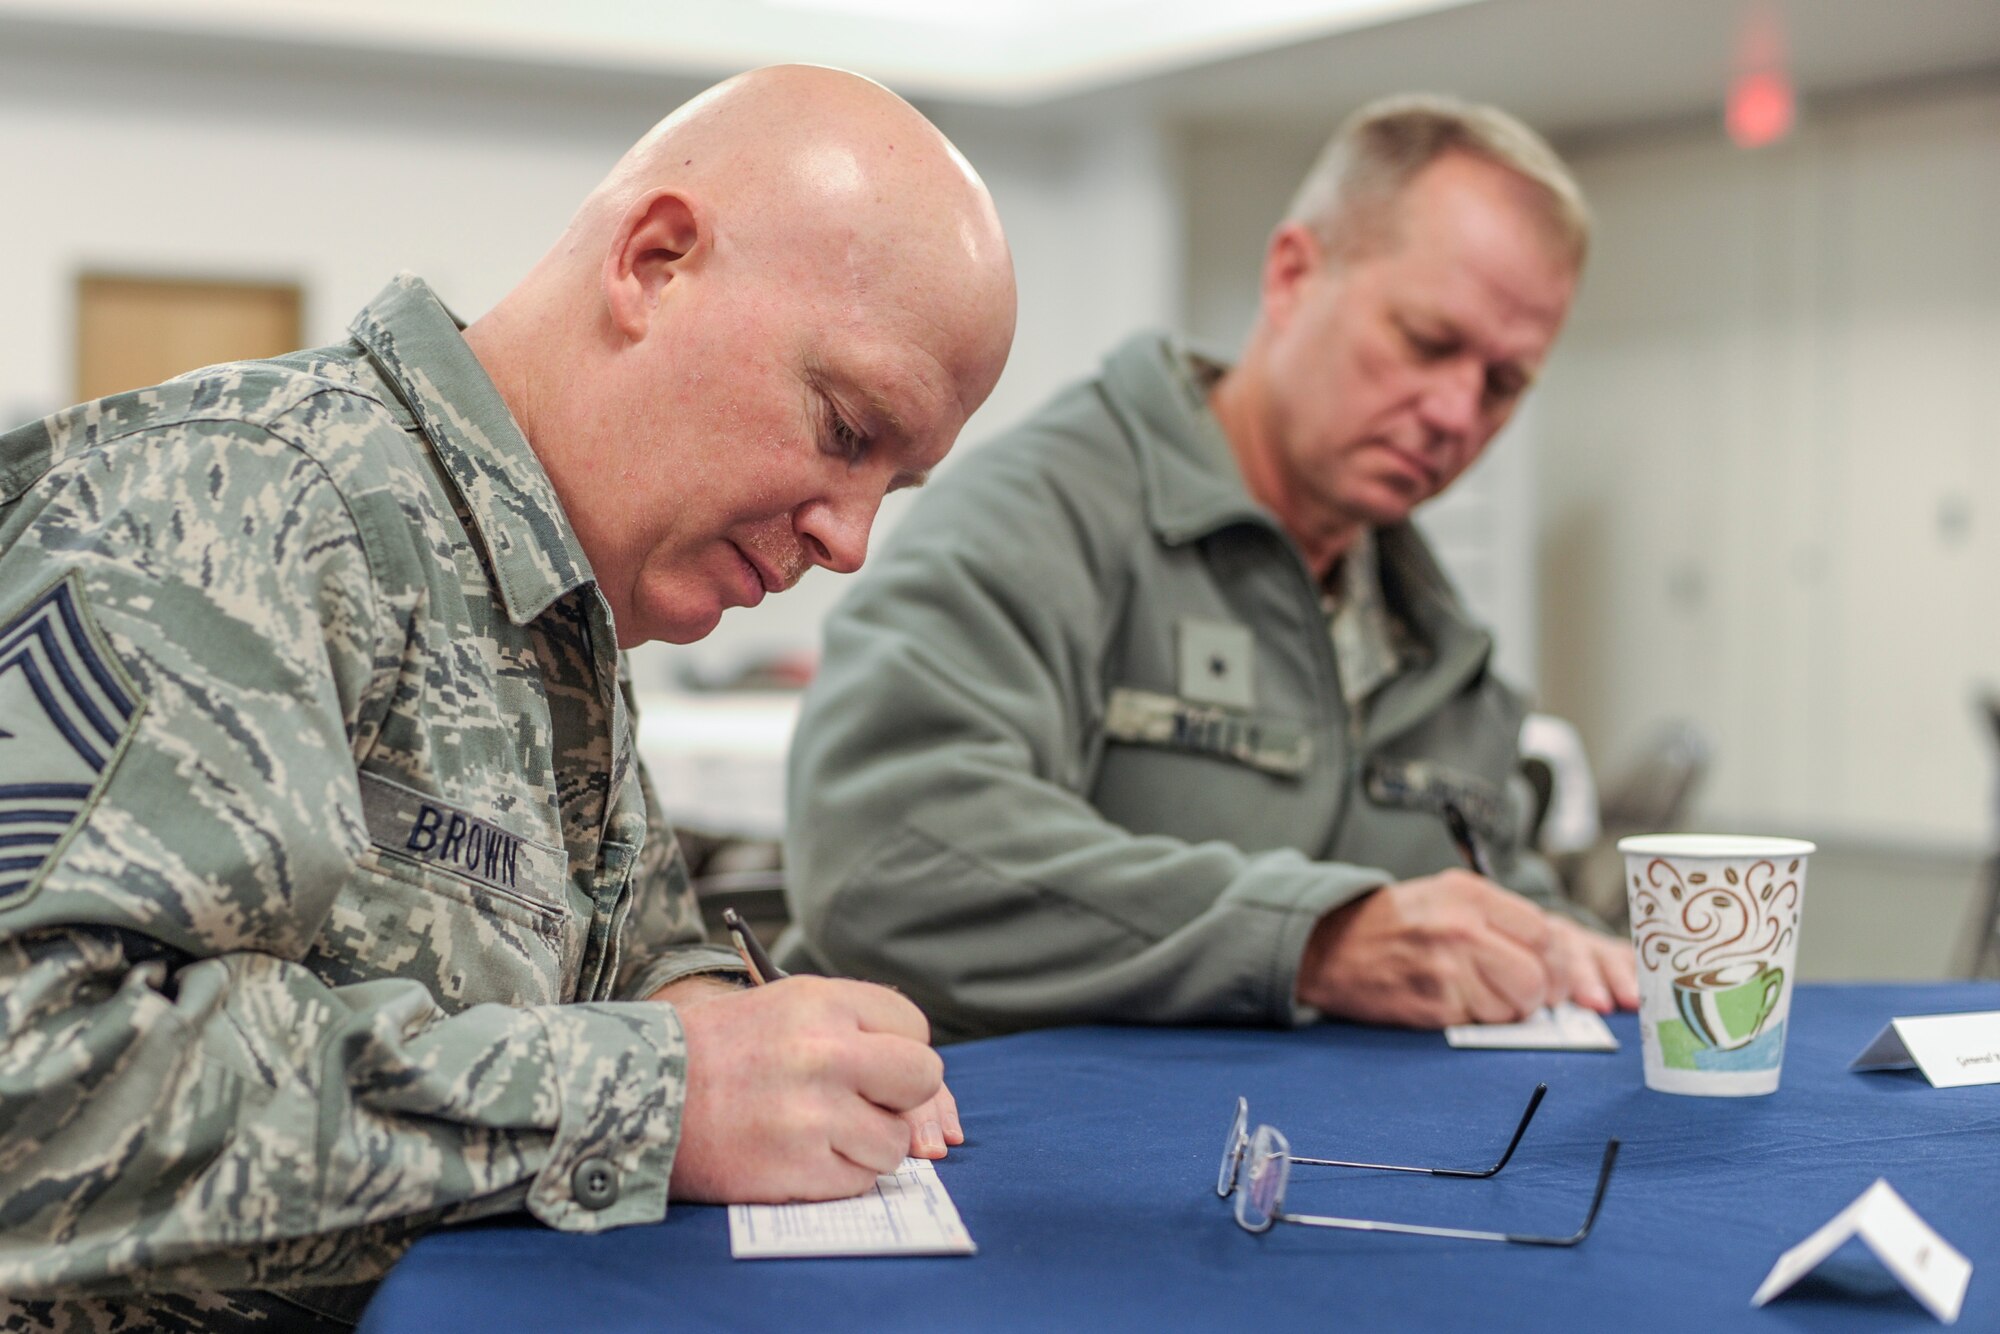 U.S. Air Force Command Chief Master Sgt. Jeffery Brown, 354th Fighter Wing command chief, and Brig. Gen. Mark Kelly, 354th FW commander, sign Air Force Assistance Fund payroll deduction forms at the AFAF fundraiser kickoff at the base chapel March 11, 2013, Eielson Air Force Base, Alaska. Donations to the campaign lend critical support to fellow Airmen and their families. For more information, contact your unit AFAF Key Worker.  (U.S. Air Force photo/Airman 1st Class Peter Reft)